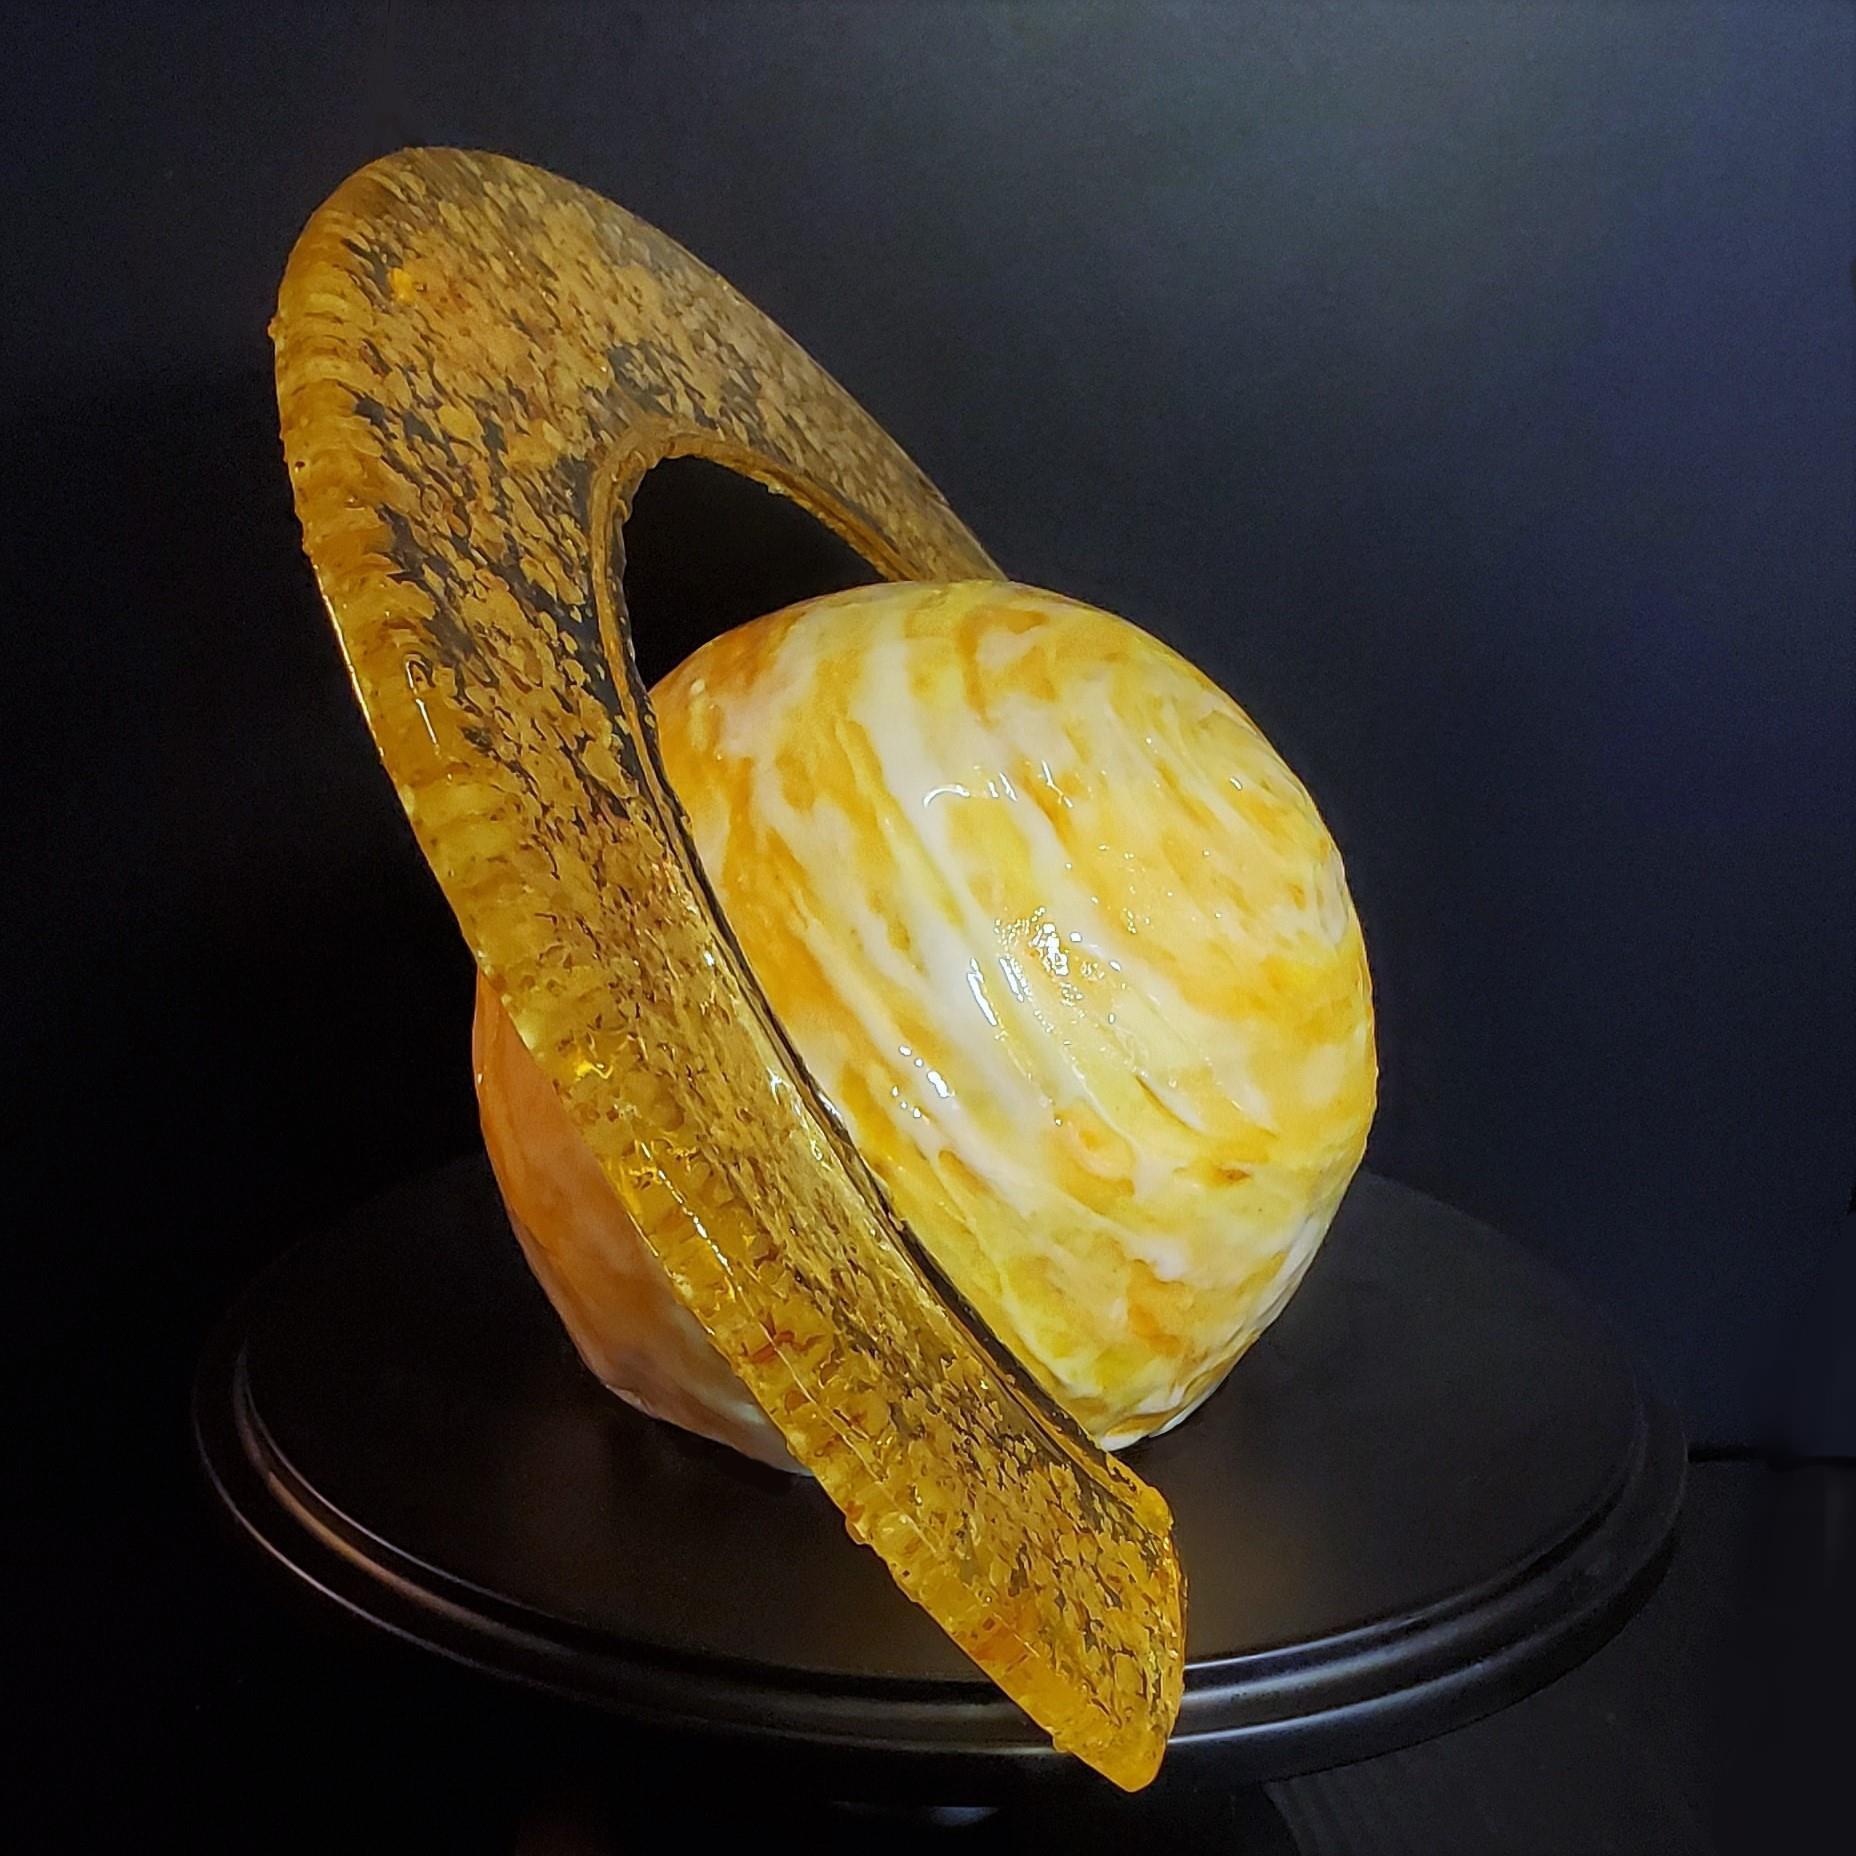 In her free time, graduate student Claire Lamman bakes astrophysics-related cakes and cookies, including this Saturn cake.